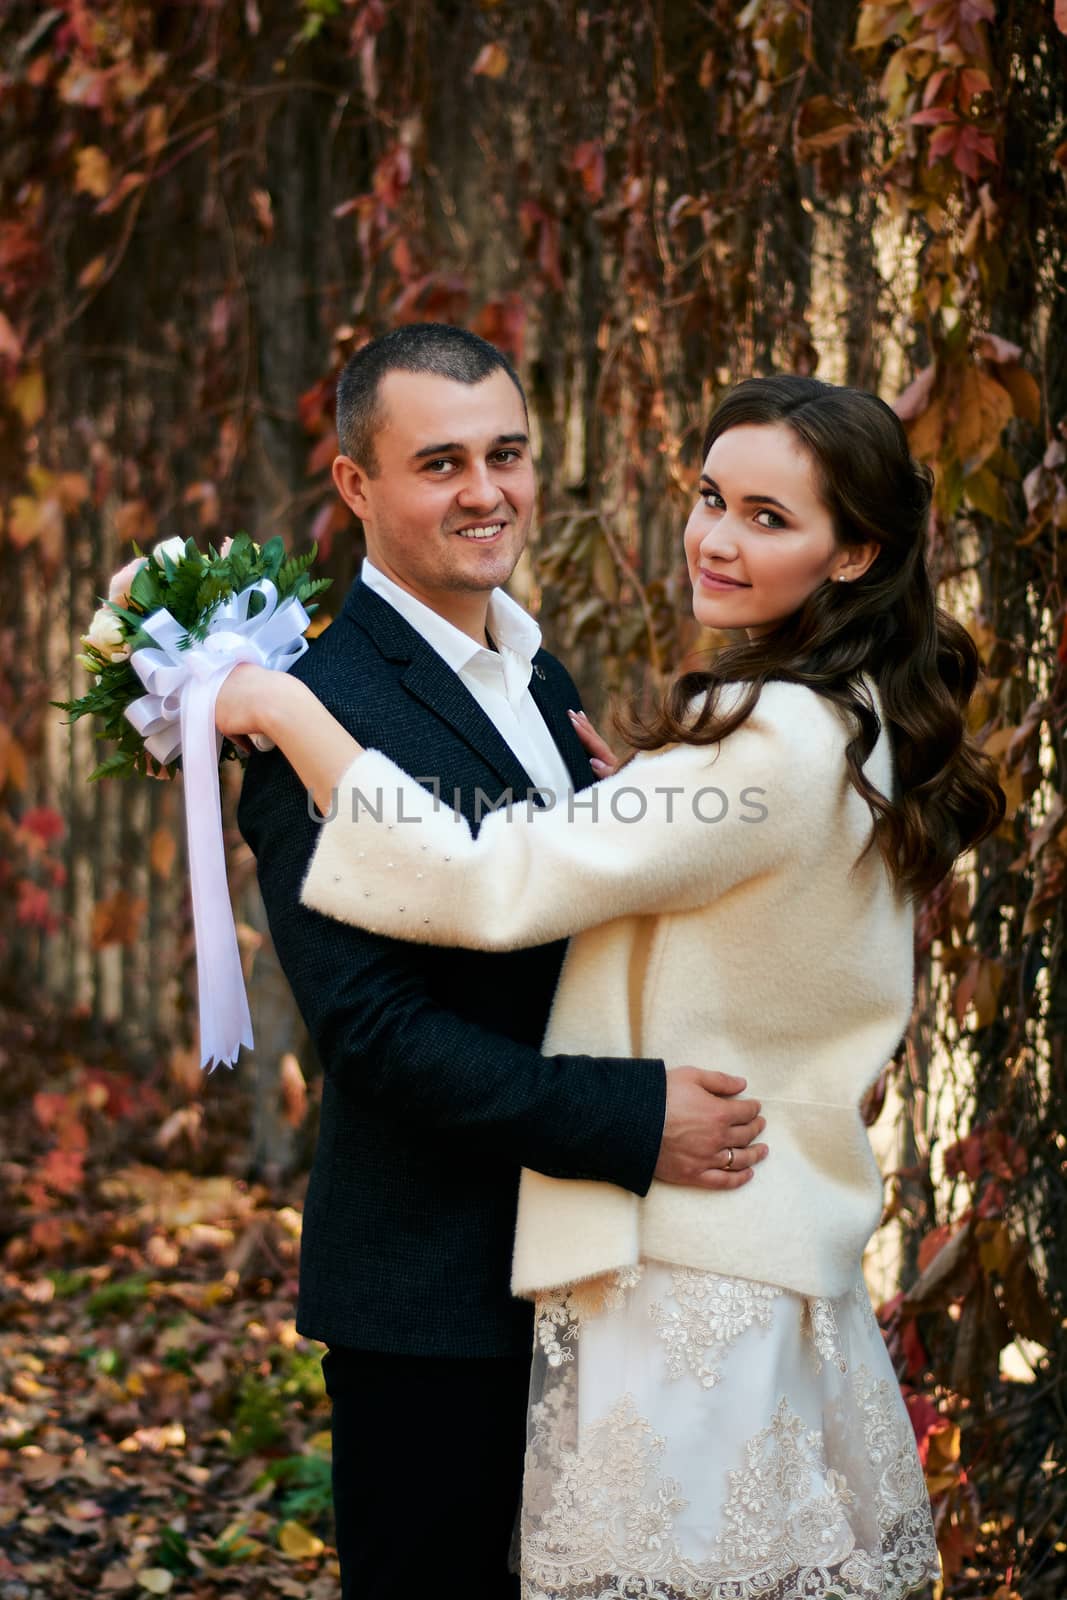 Couple in love close-up portrait. Young male and woman just married. Concept of happy family. Modern family outdoor. Adorable family demonstrate love and care. Autumn vacation.